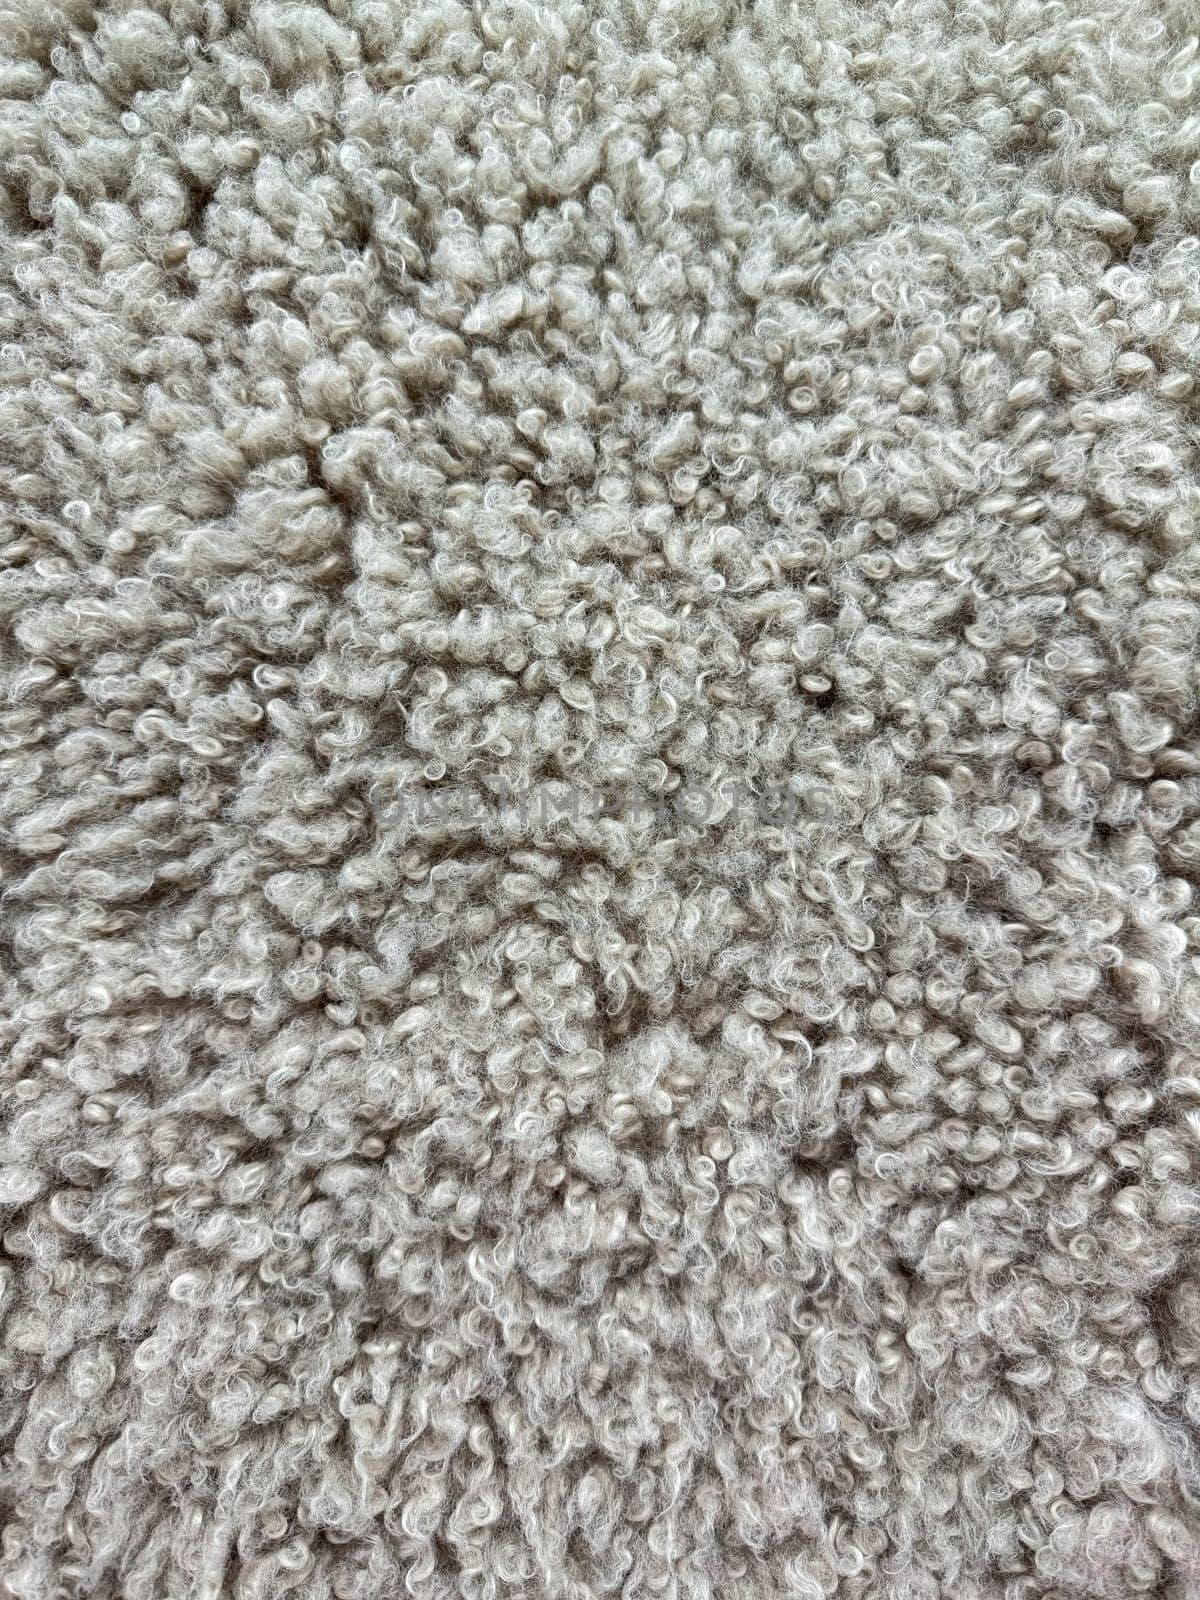 Detailed macro shot of dense, curly grey wool texture with natural fleece patterns for interior design and textiles. by Lunnica